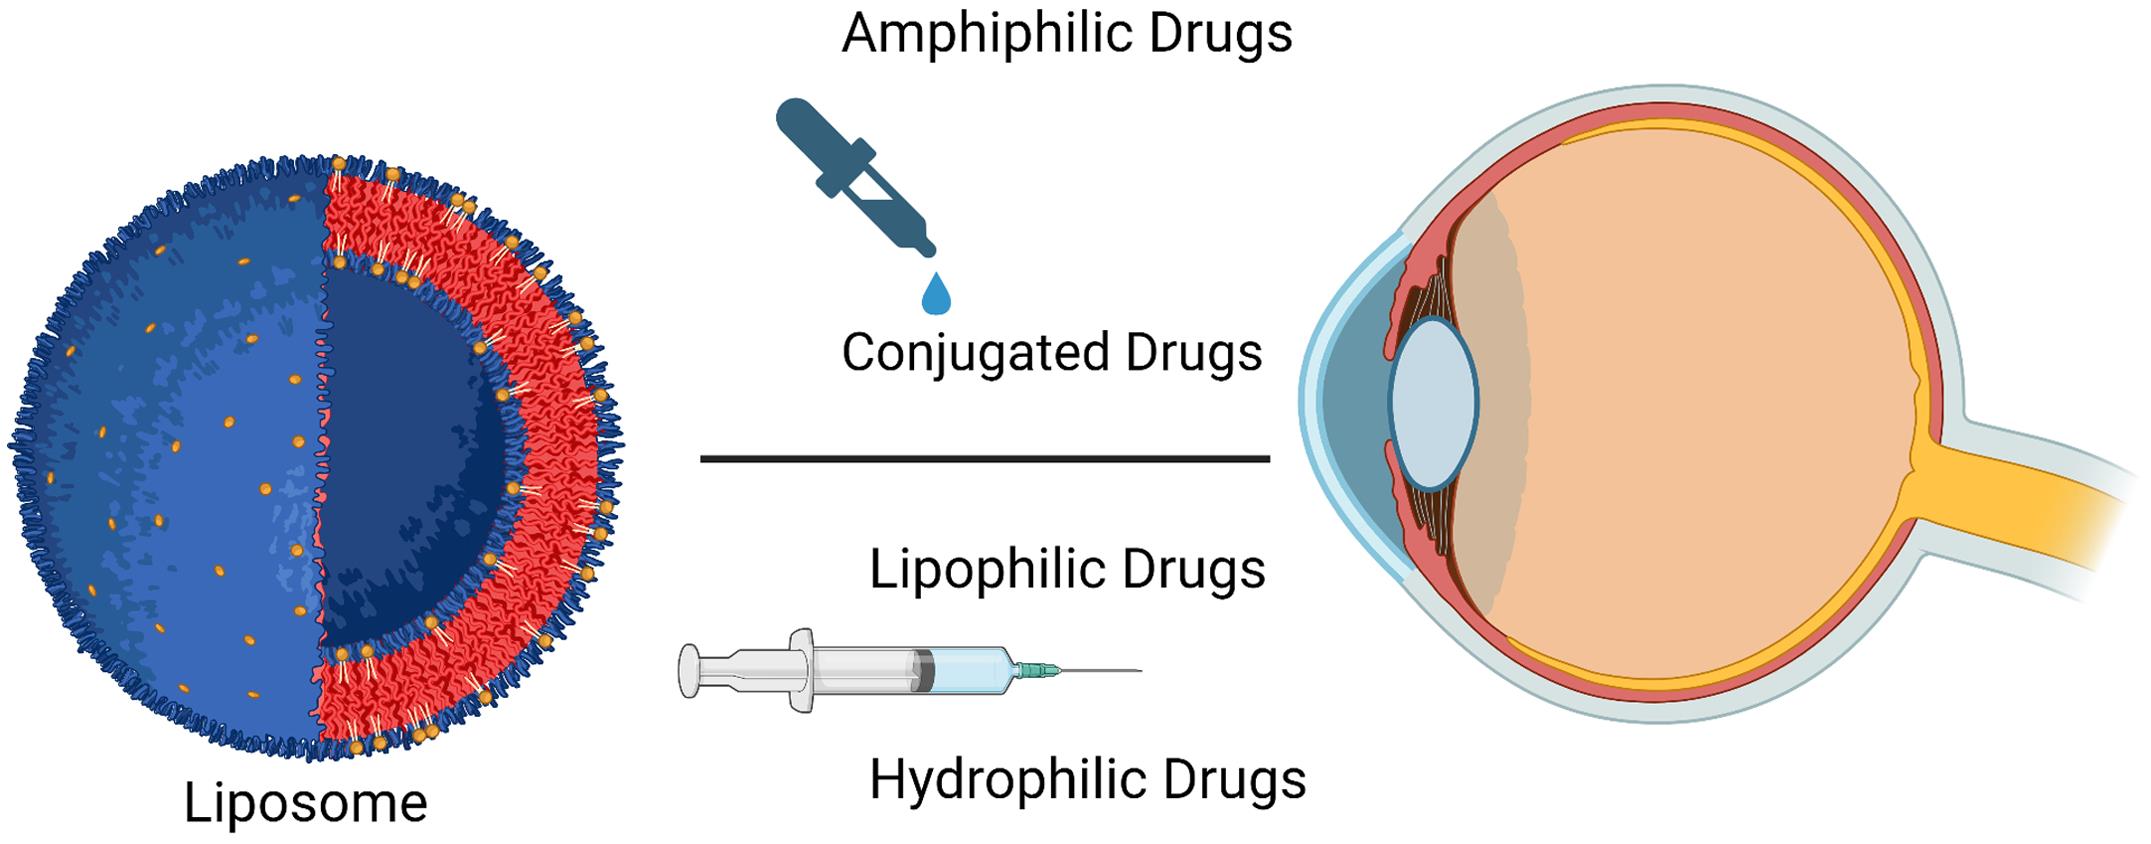 Liposome delivery to the eye. Different properties of the drug which can be formulated as a liposome for the best action are depicted in the figure.